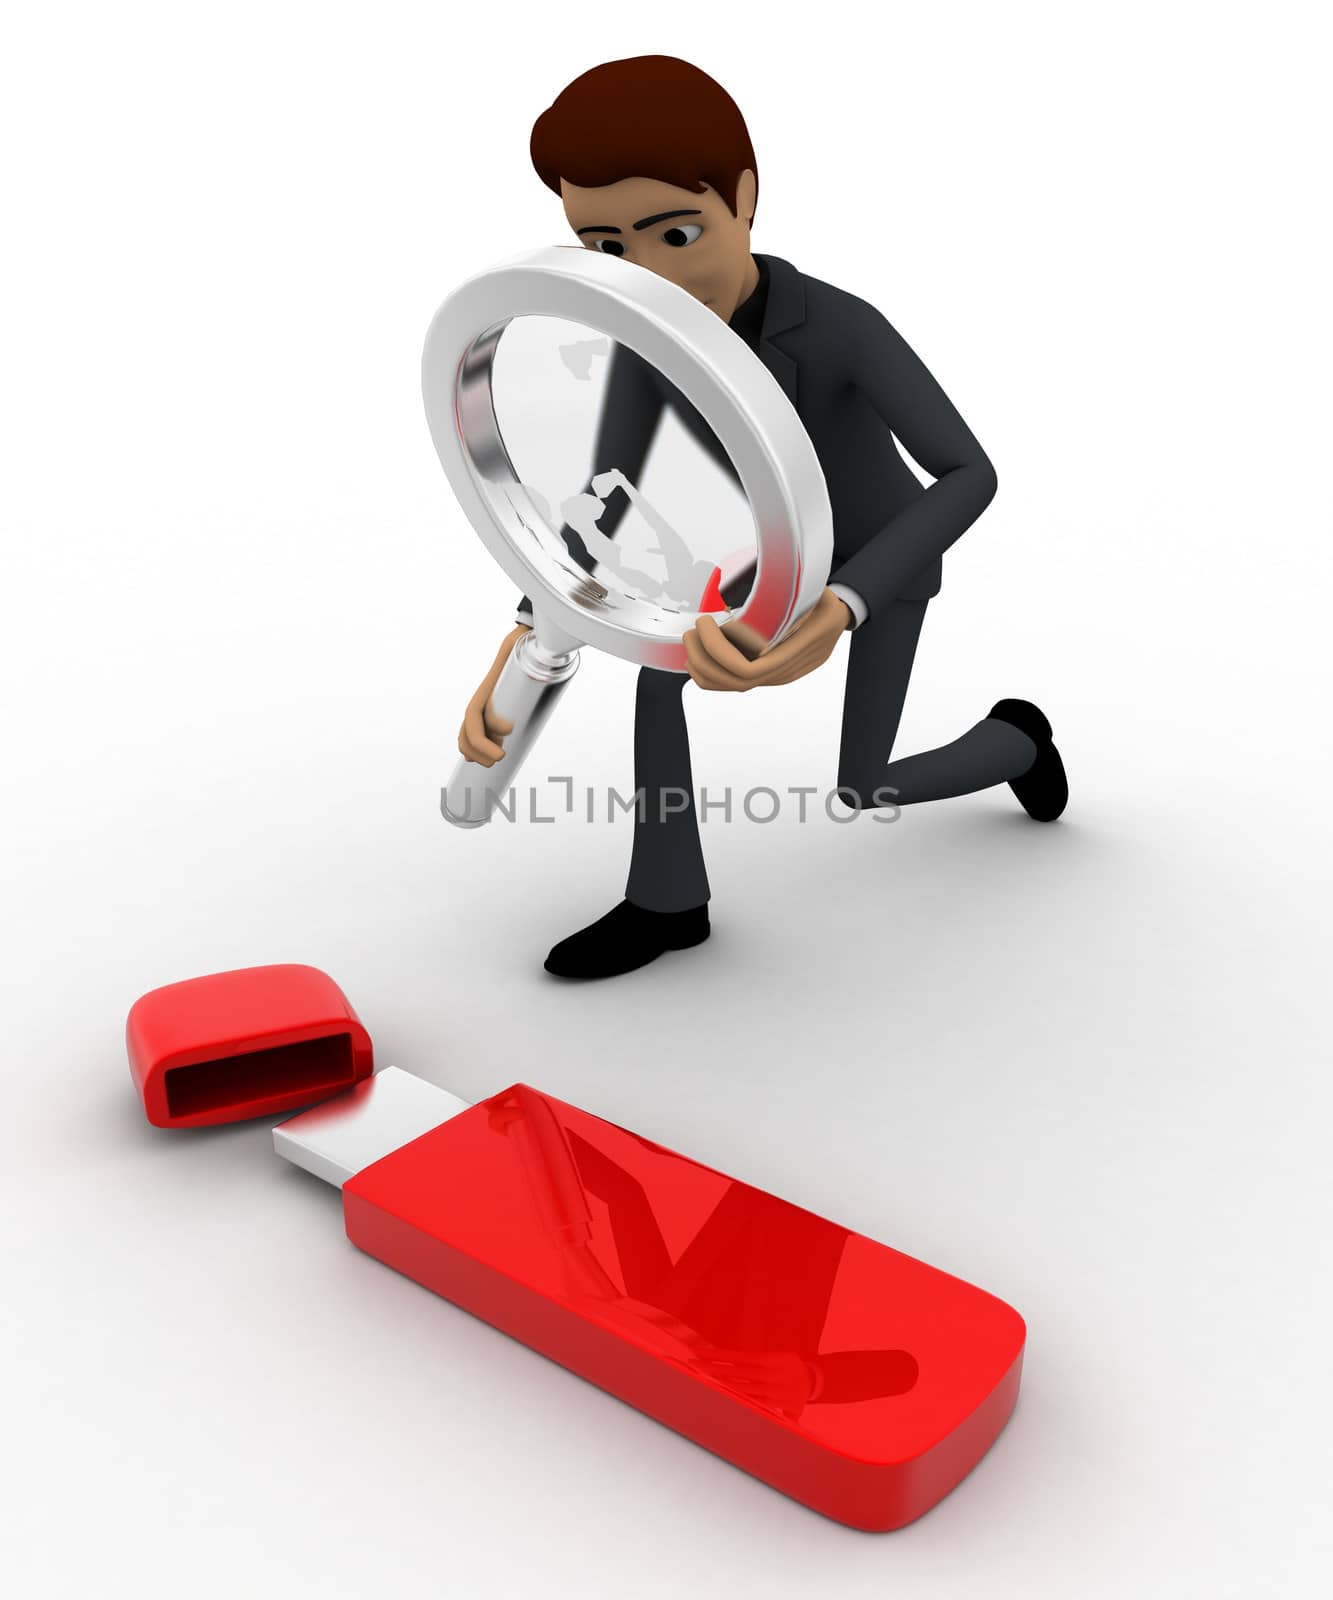 3d man examine usb pendrive using magnifying glass concept on white backgorund, side angle view